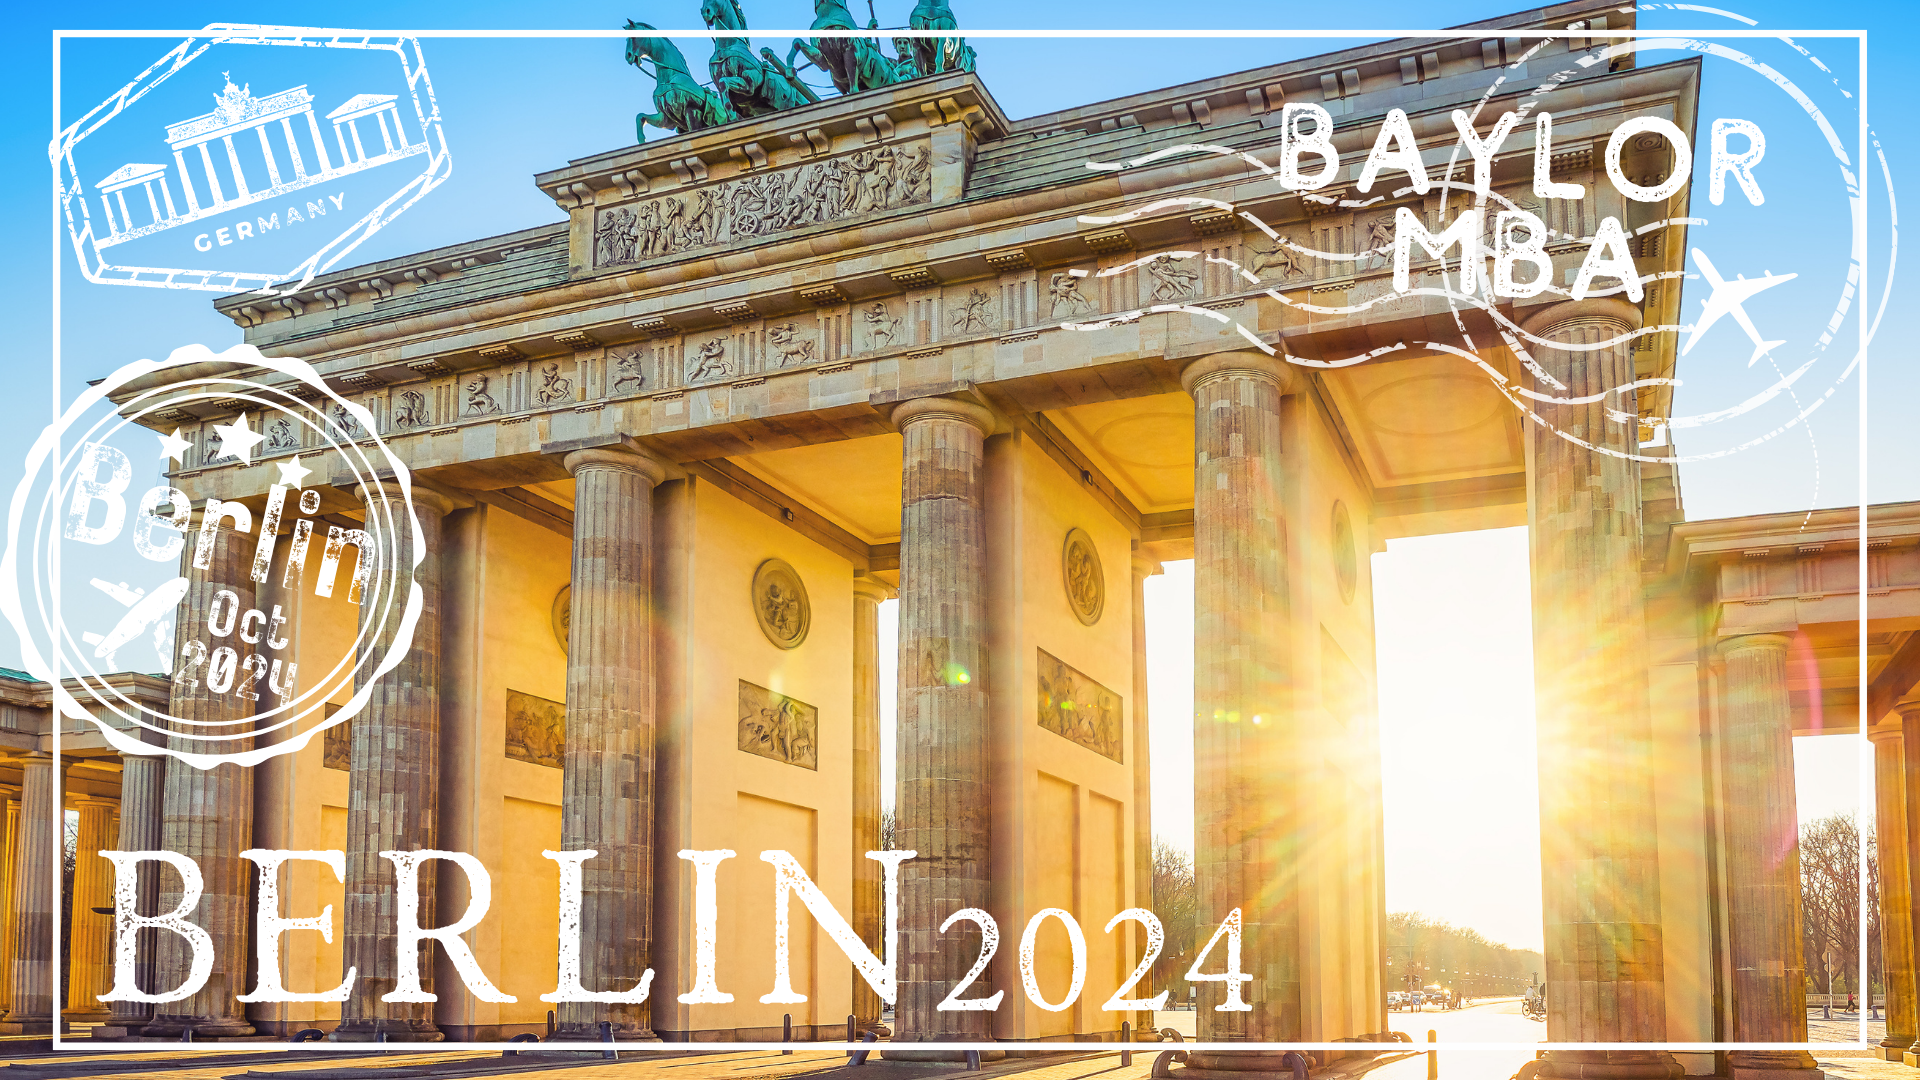 Image of monument in Berlin, Germany with stamps over the photo that say, "Baylor MBA", "Berlin 2024," "Berlin Oct 2024"